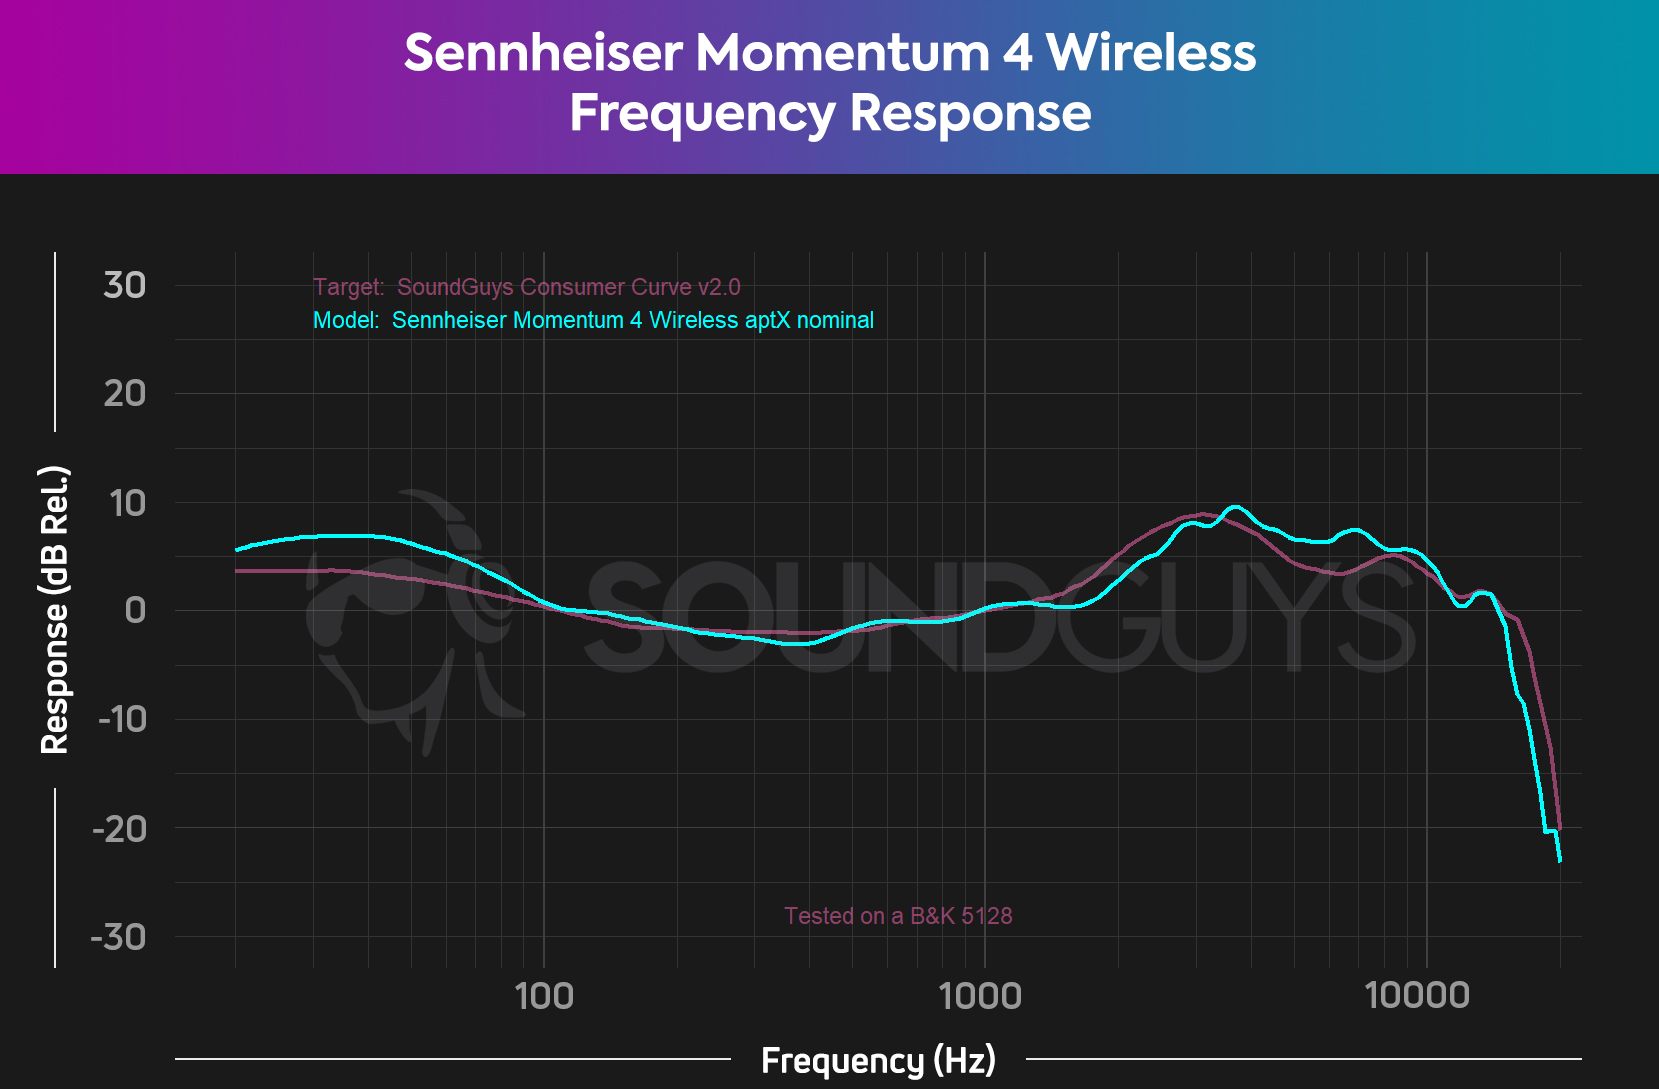 A chart showing the Sennheiser Momentum 4 Wireless' frequency response closely matching the SoundGuys Consumer Curve, with only minor deviations.